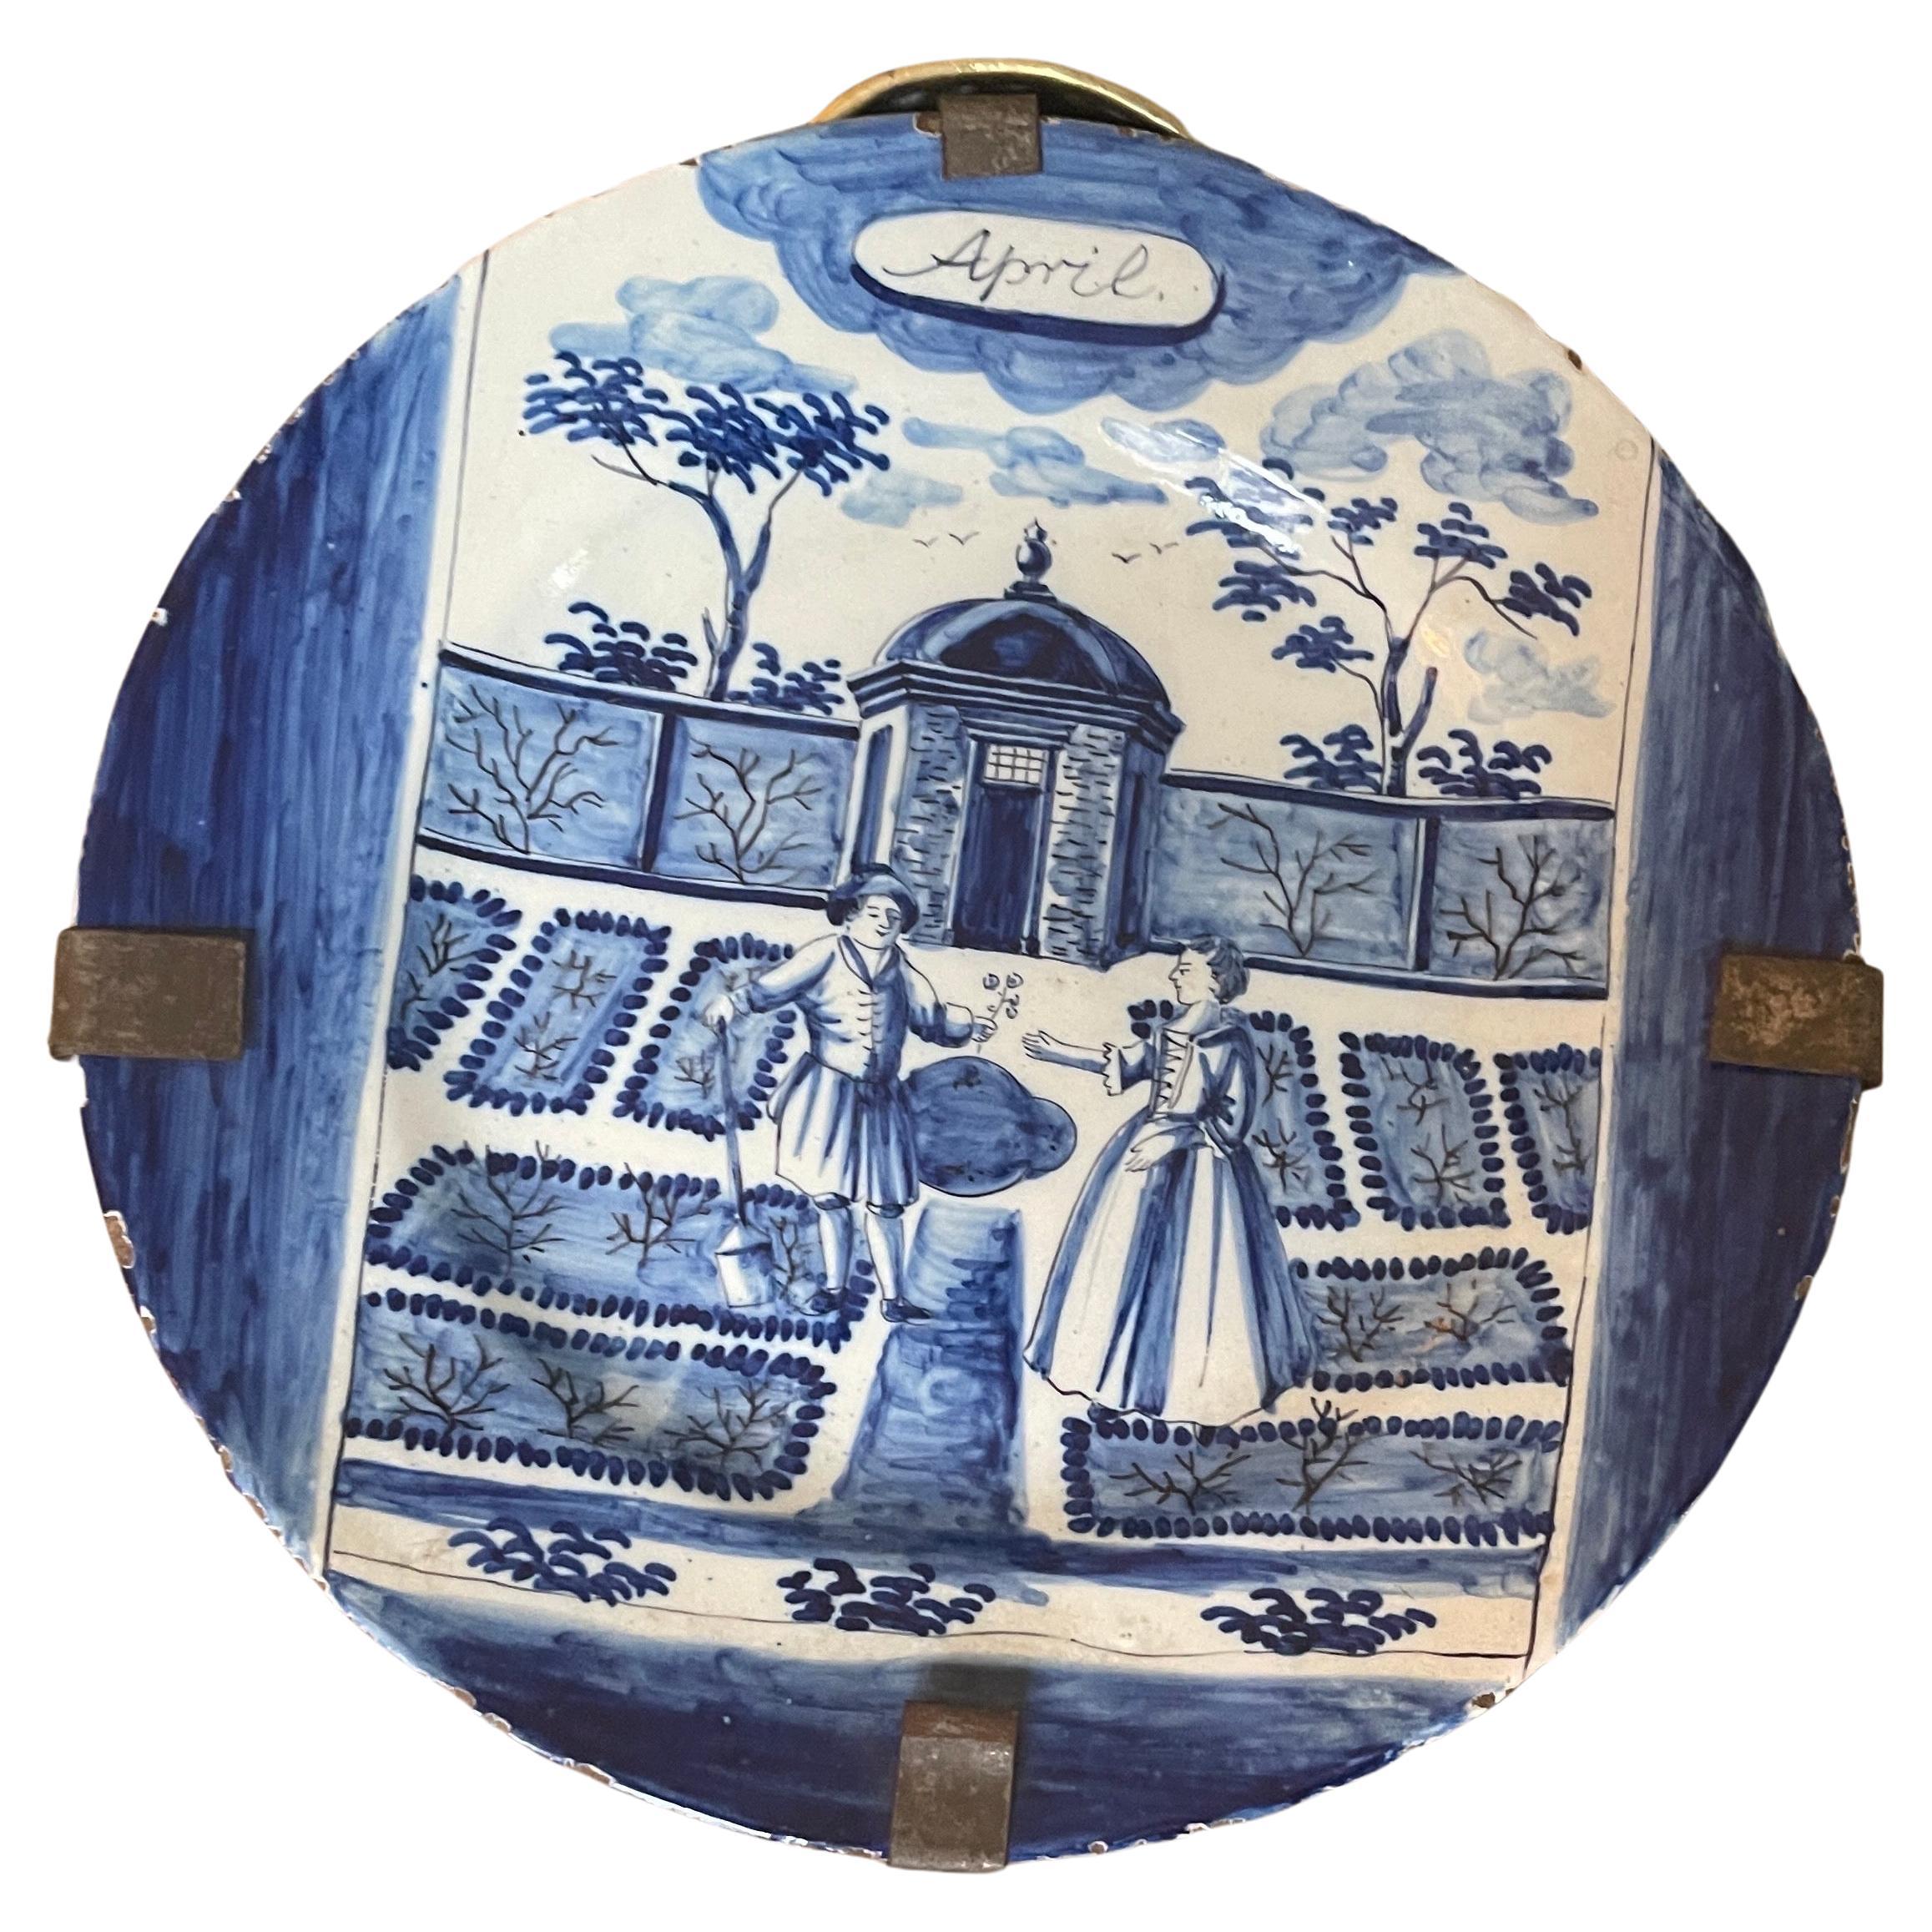 Pair of Delft calendar plates in blue and white garden scenarie. 

March and April plates.

These two plates were part of a 12 plate series of calendar plates.